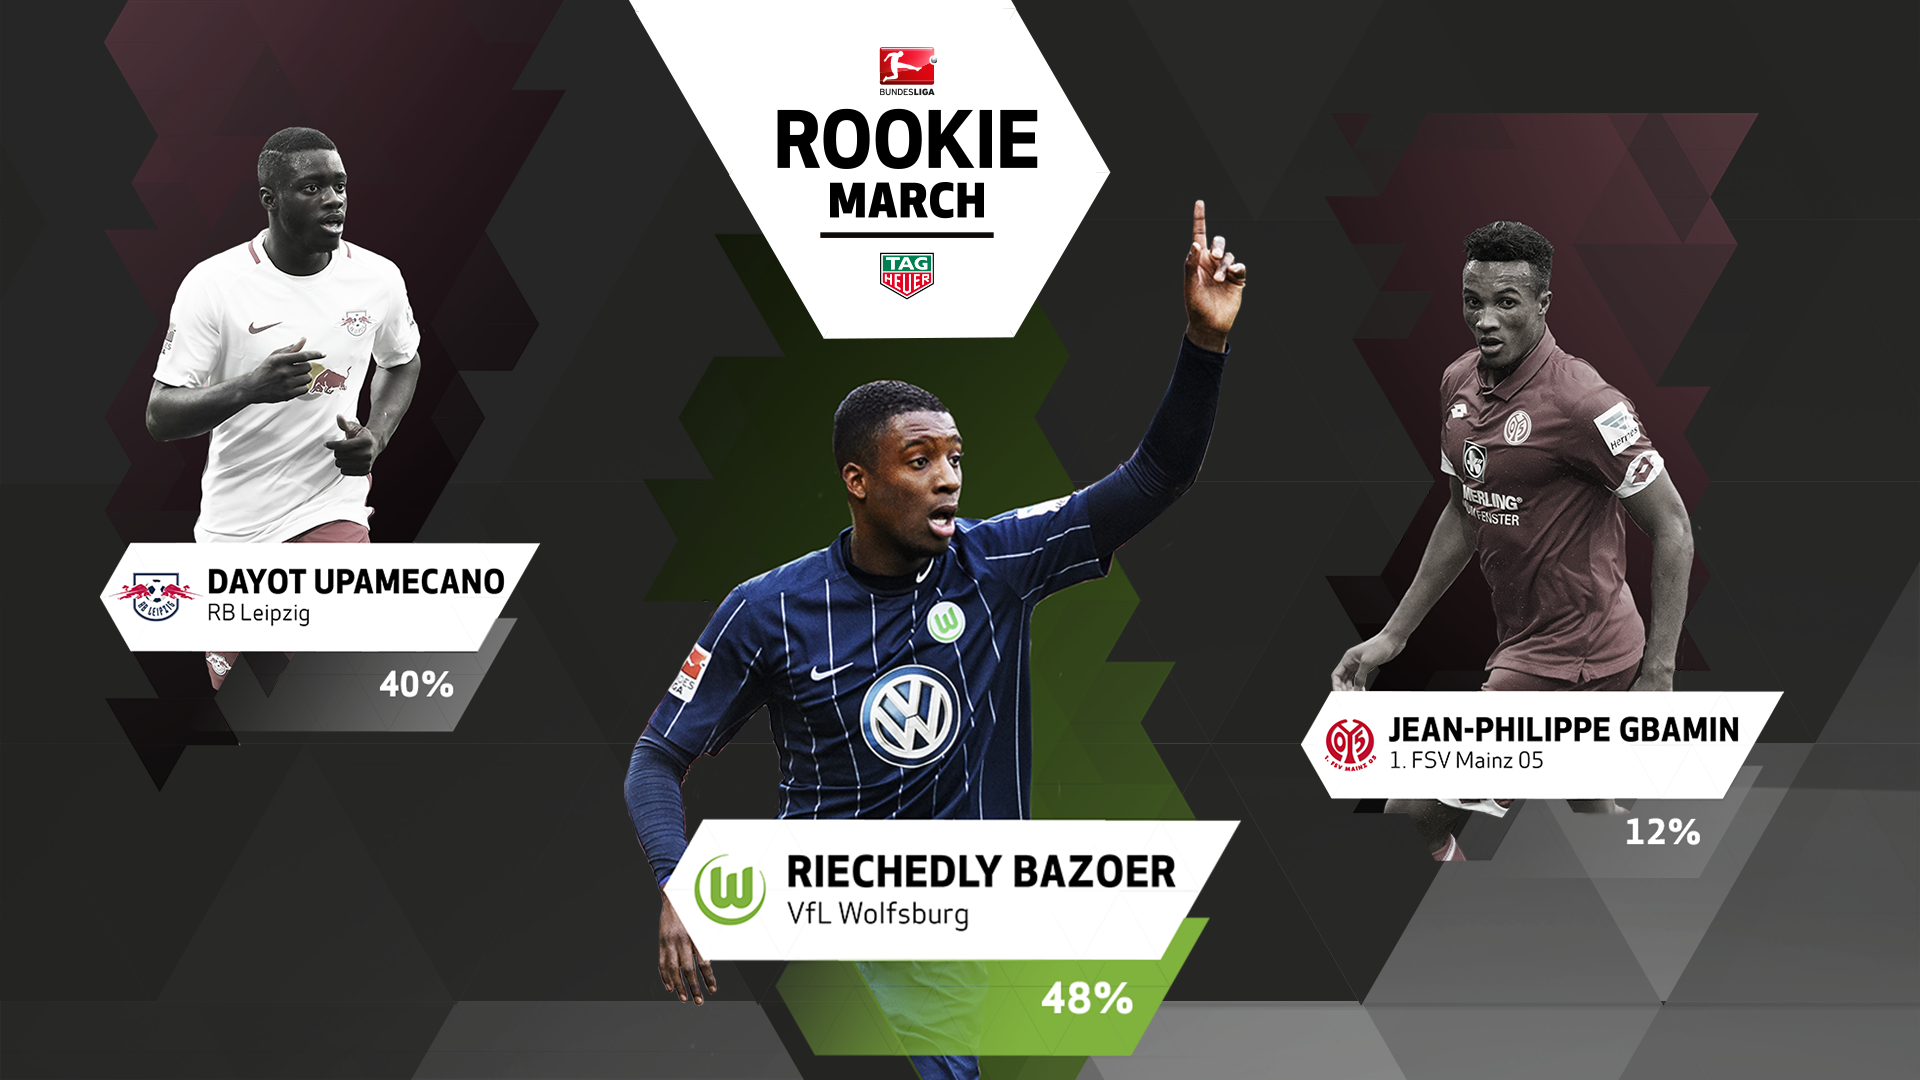 Tag Heuer On Twitter Congratulations To Riechedly Bazoer This Talent From Club Vflwolfsburg En Has Won The Title Rookie Of March Blrookie Https T Co 4gb3kmskxz